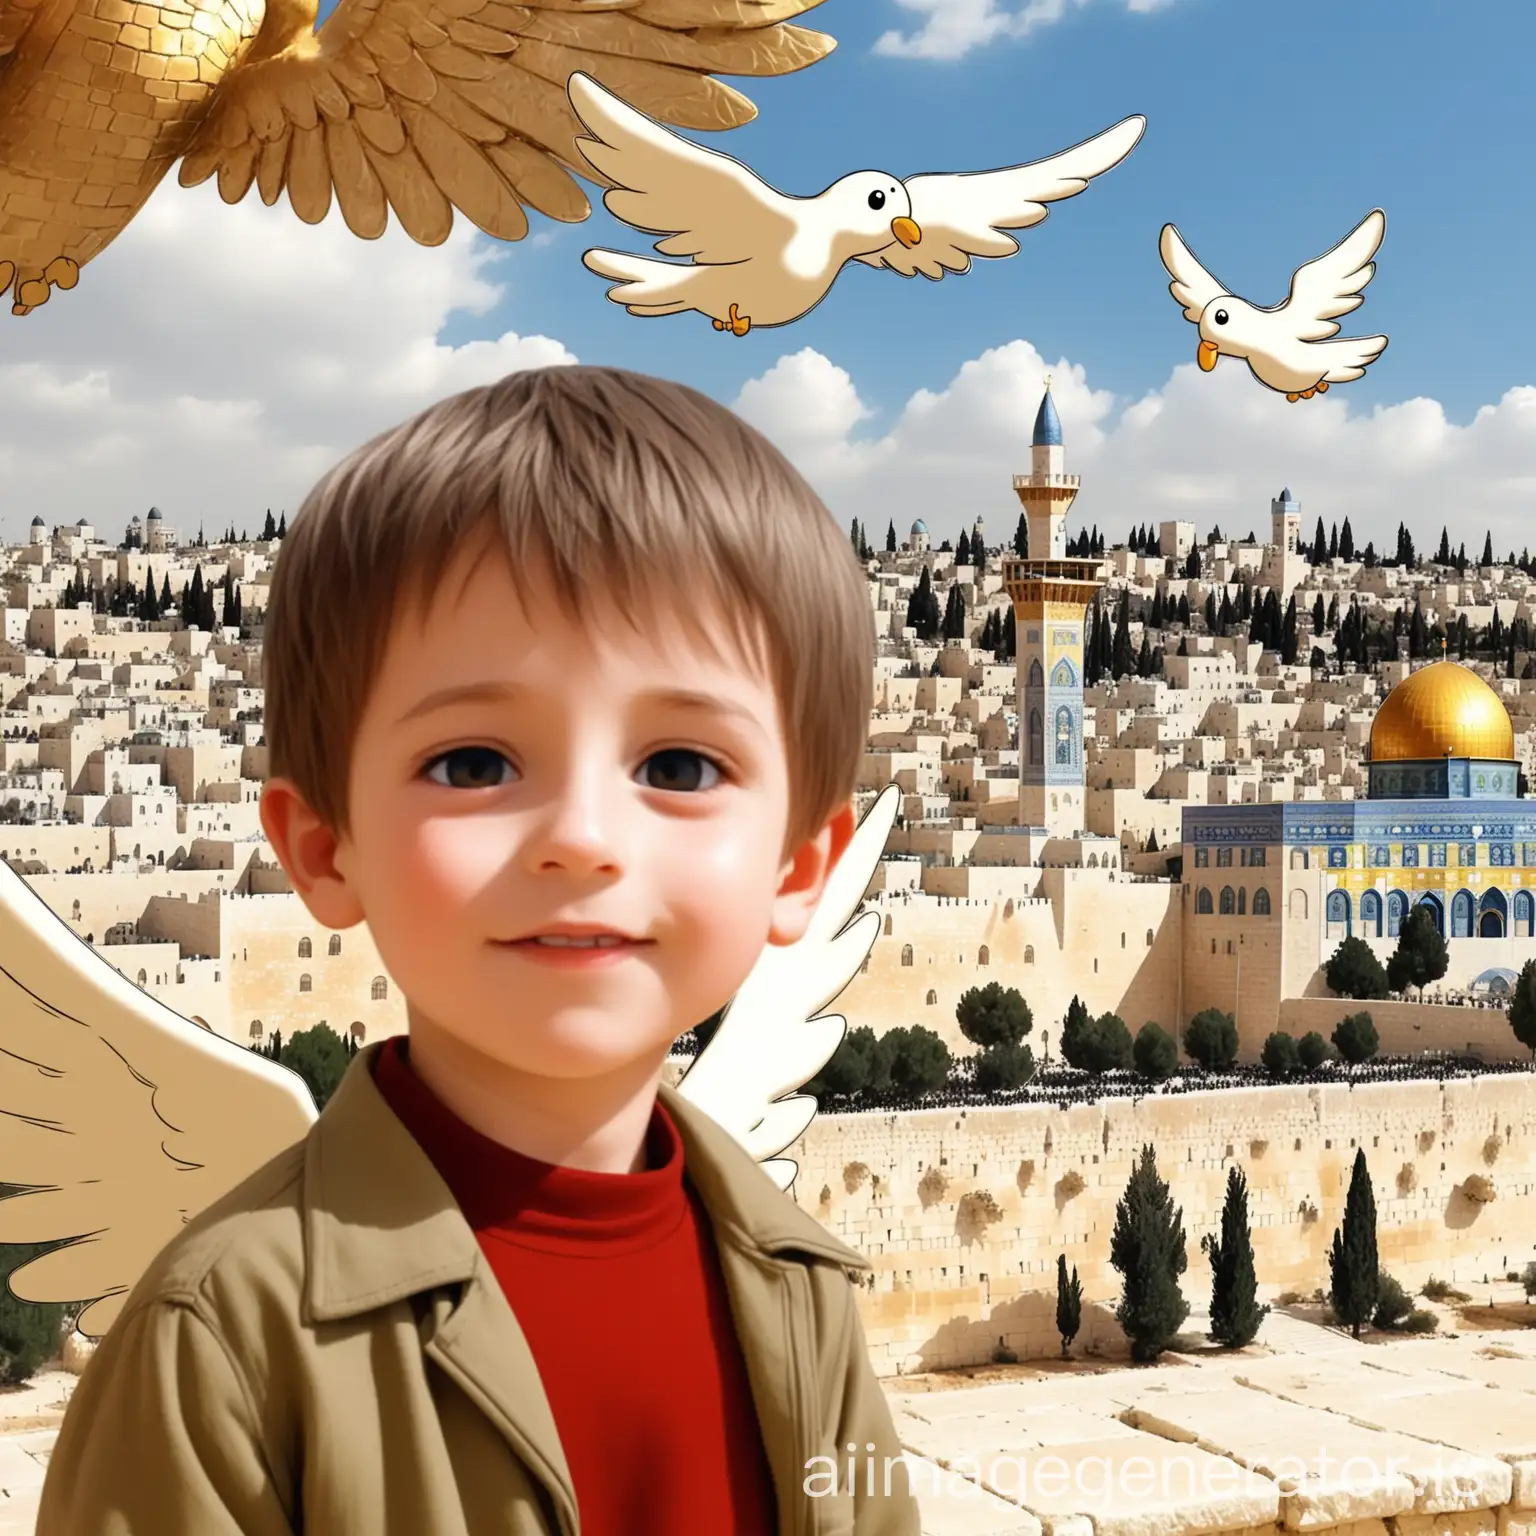 add cartoon filter on this picture of a boy with wings of childhood in front of jerusalem background